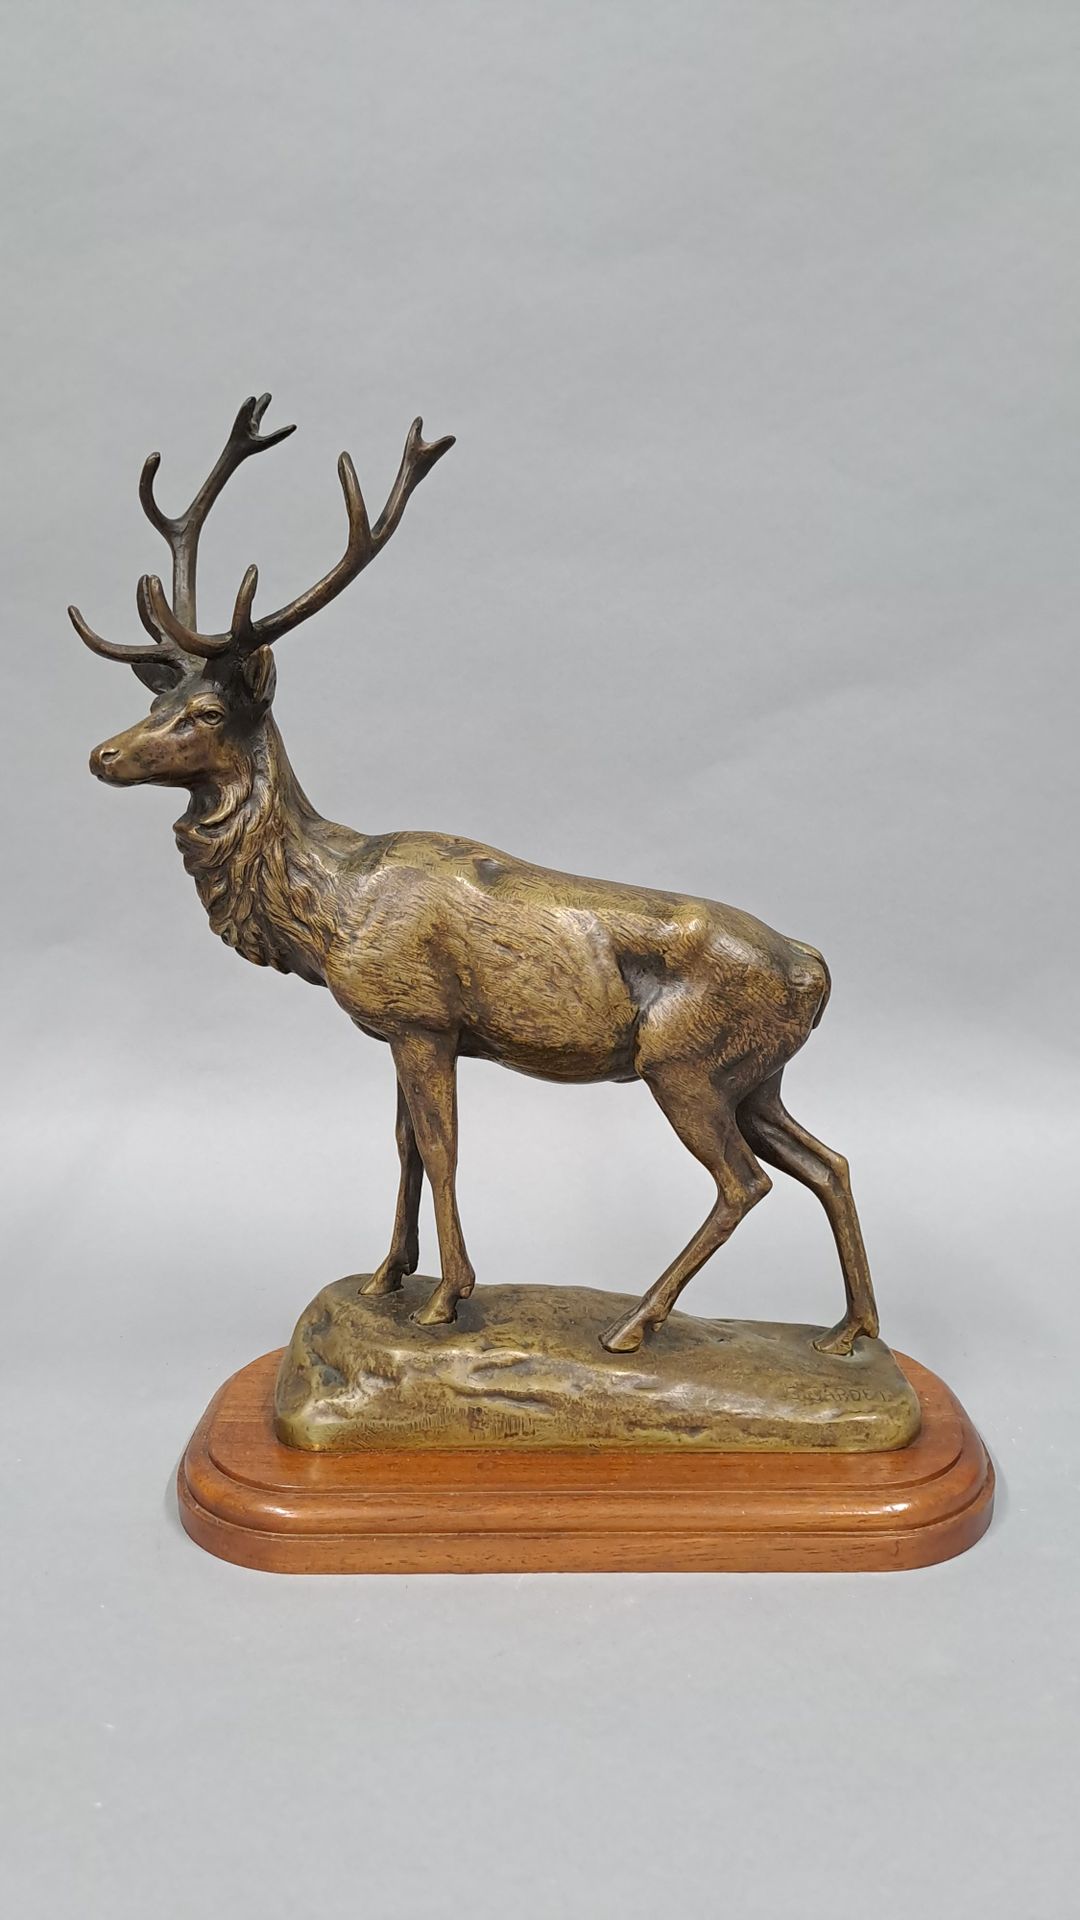 Null GARDET Georges (1863-1939)

Deer, bronze, signed lower right on the terrace&hellip;